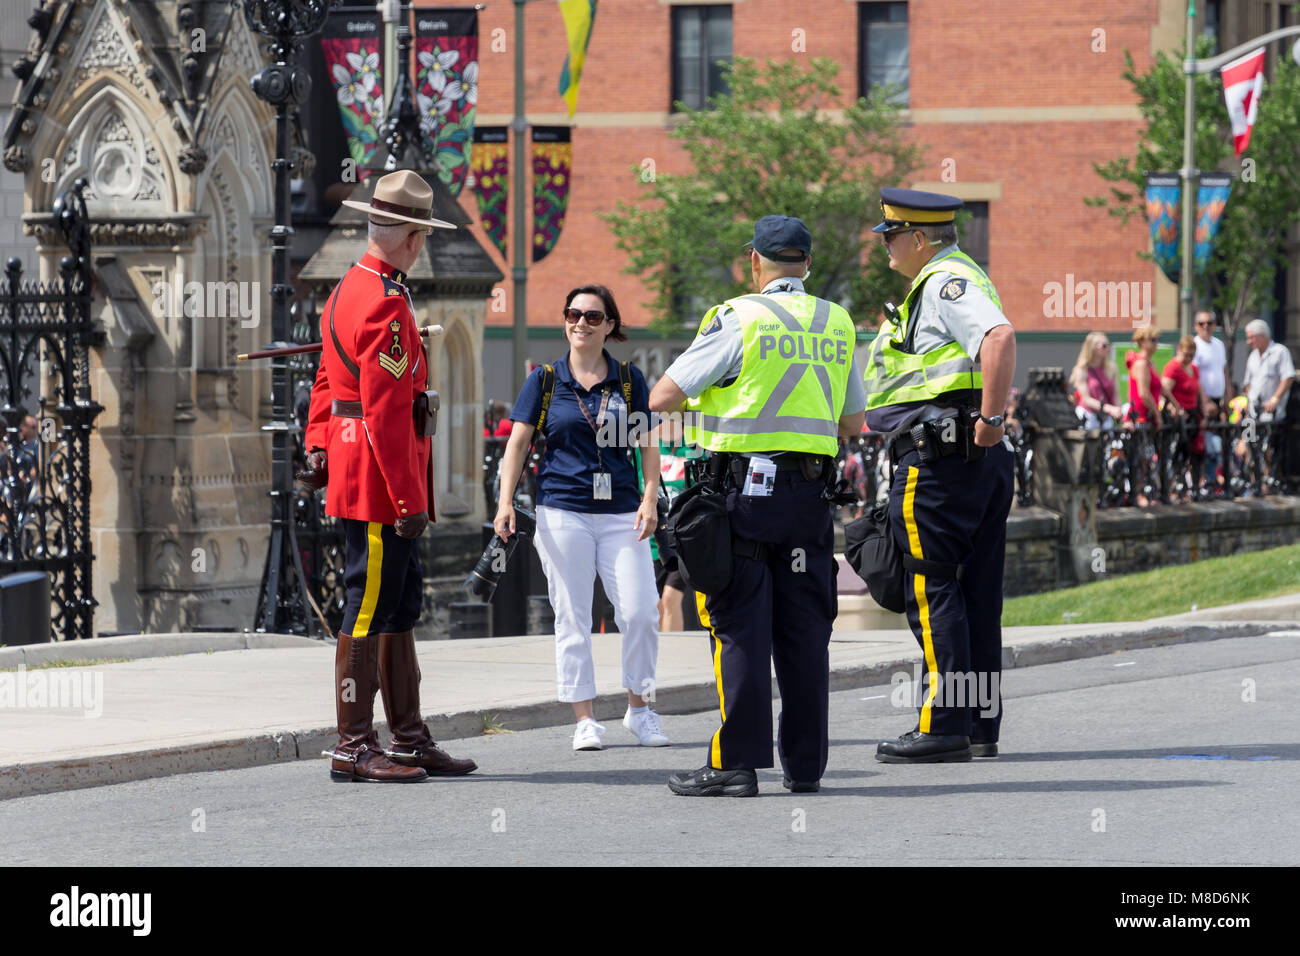 Ottawa, ON, Canada - July 01 2016: Security staff waiting for the Prime Minister's arrival Stock Photo